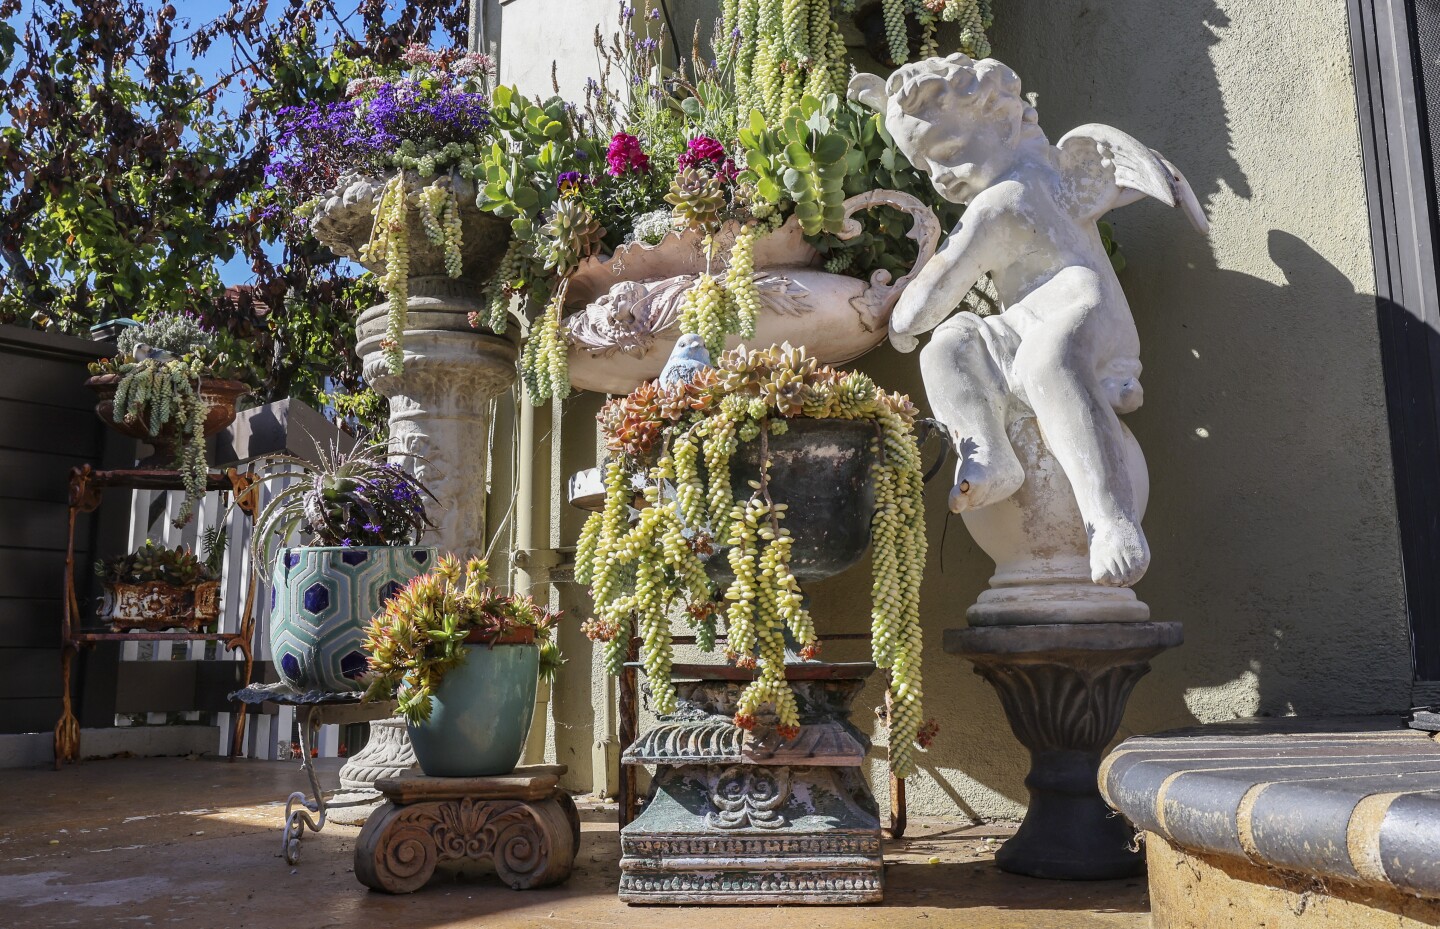 The garden brims with antique religious art and colorful potted plants 